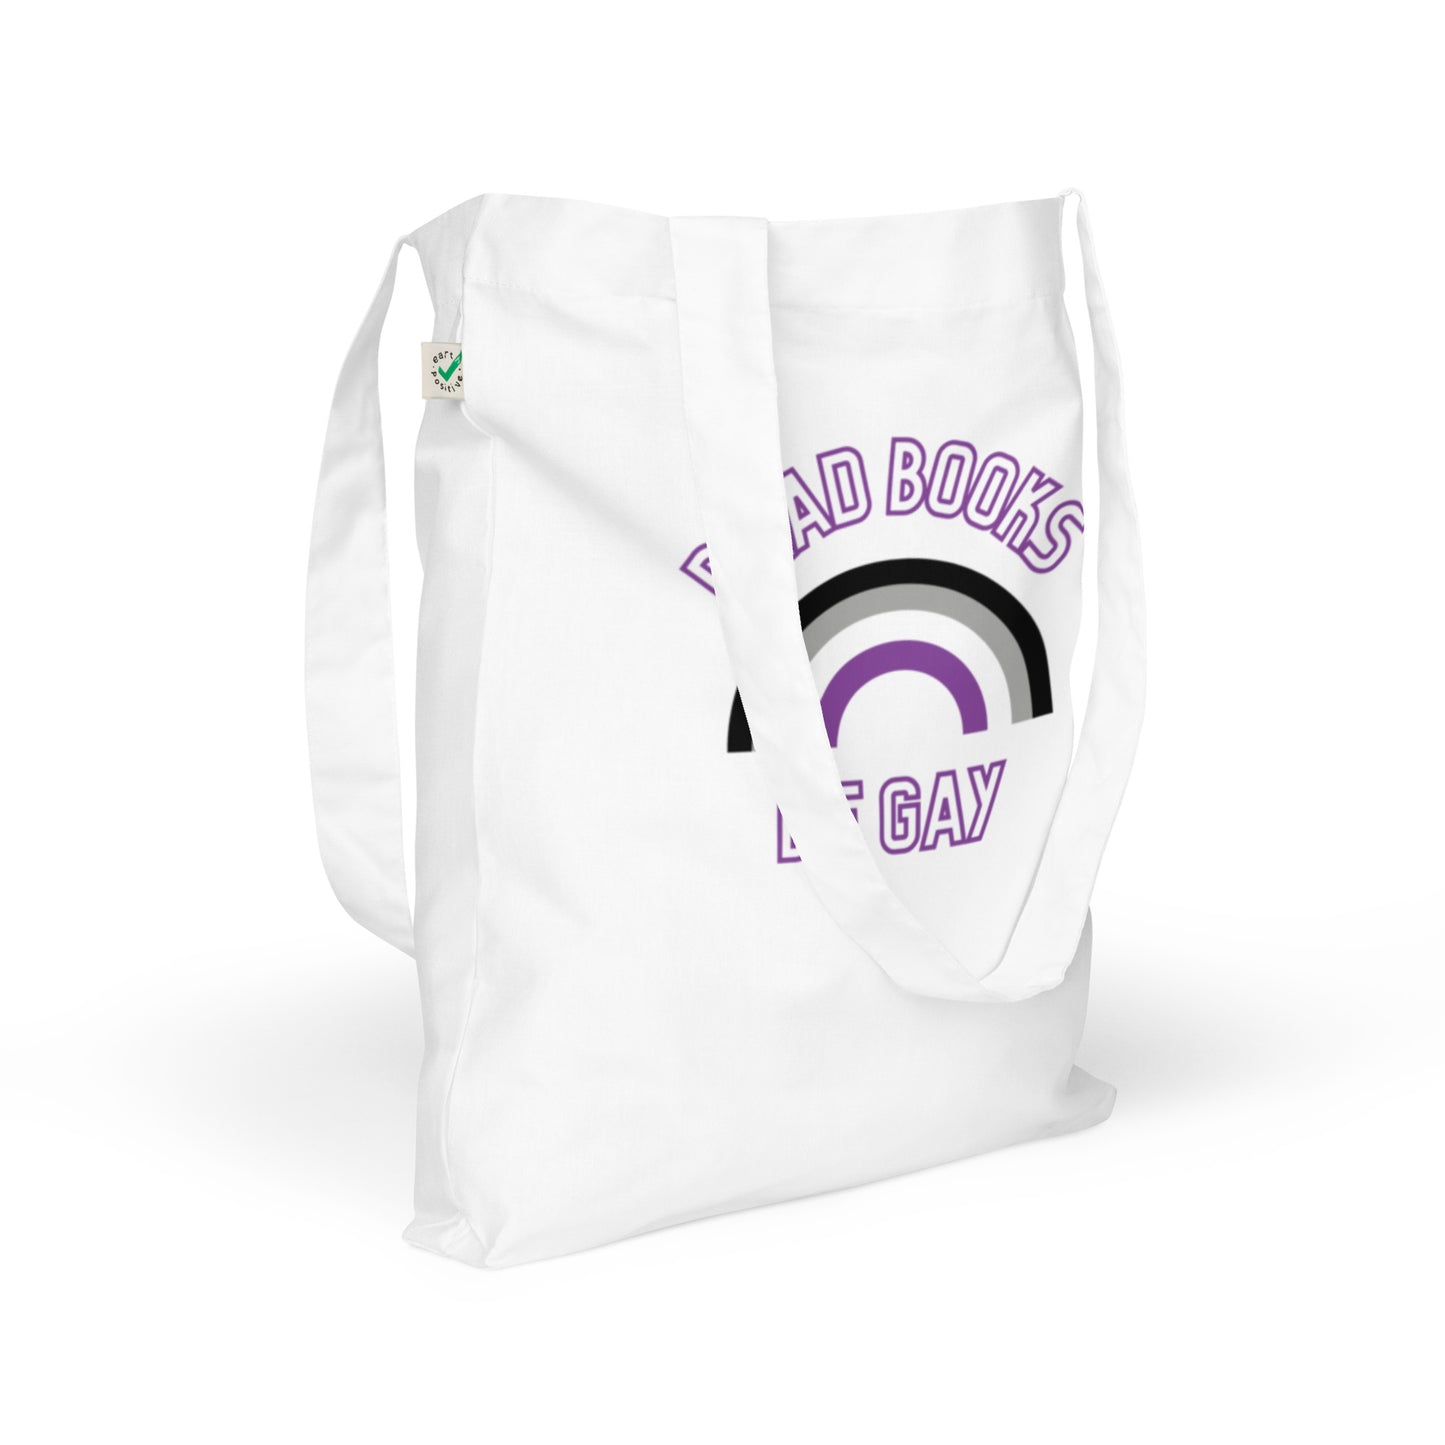 Read Books Be Gay (Asexual Colors) Organic Fashion Tote Bag